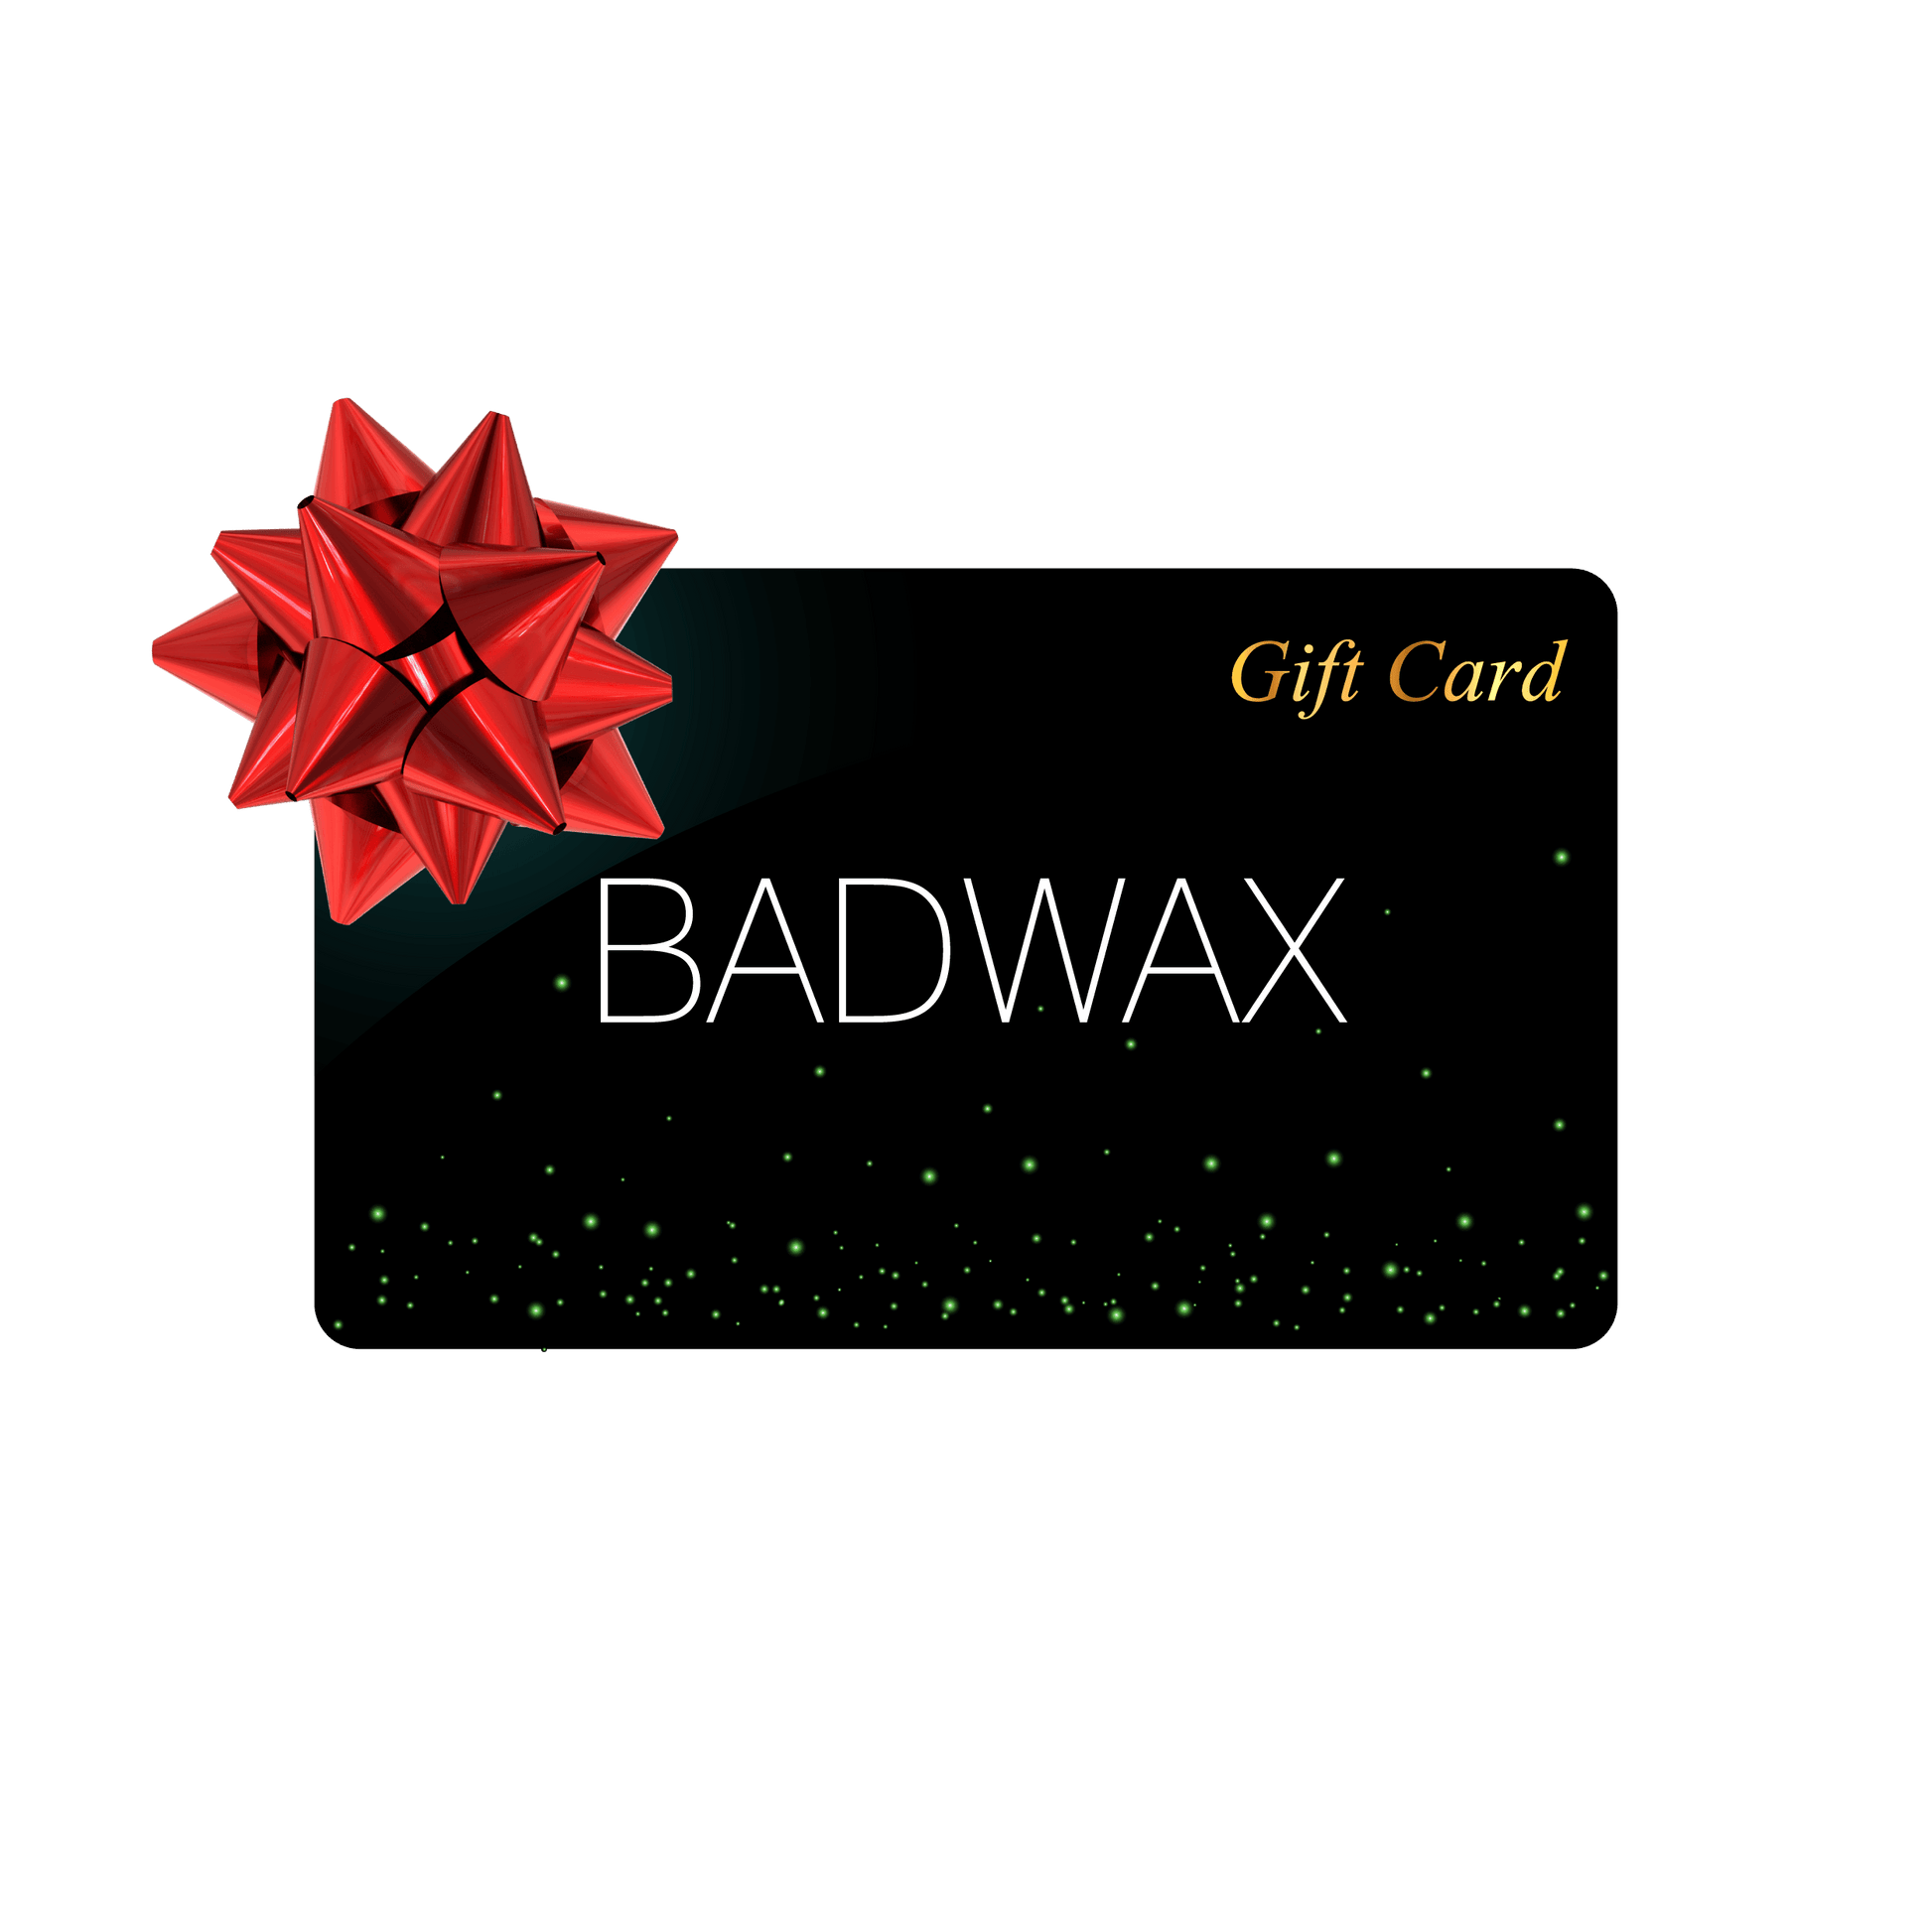 Gift Card - BADWAX